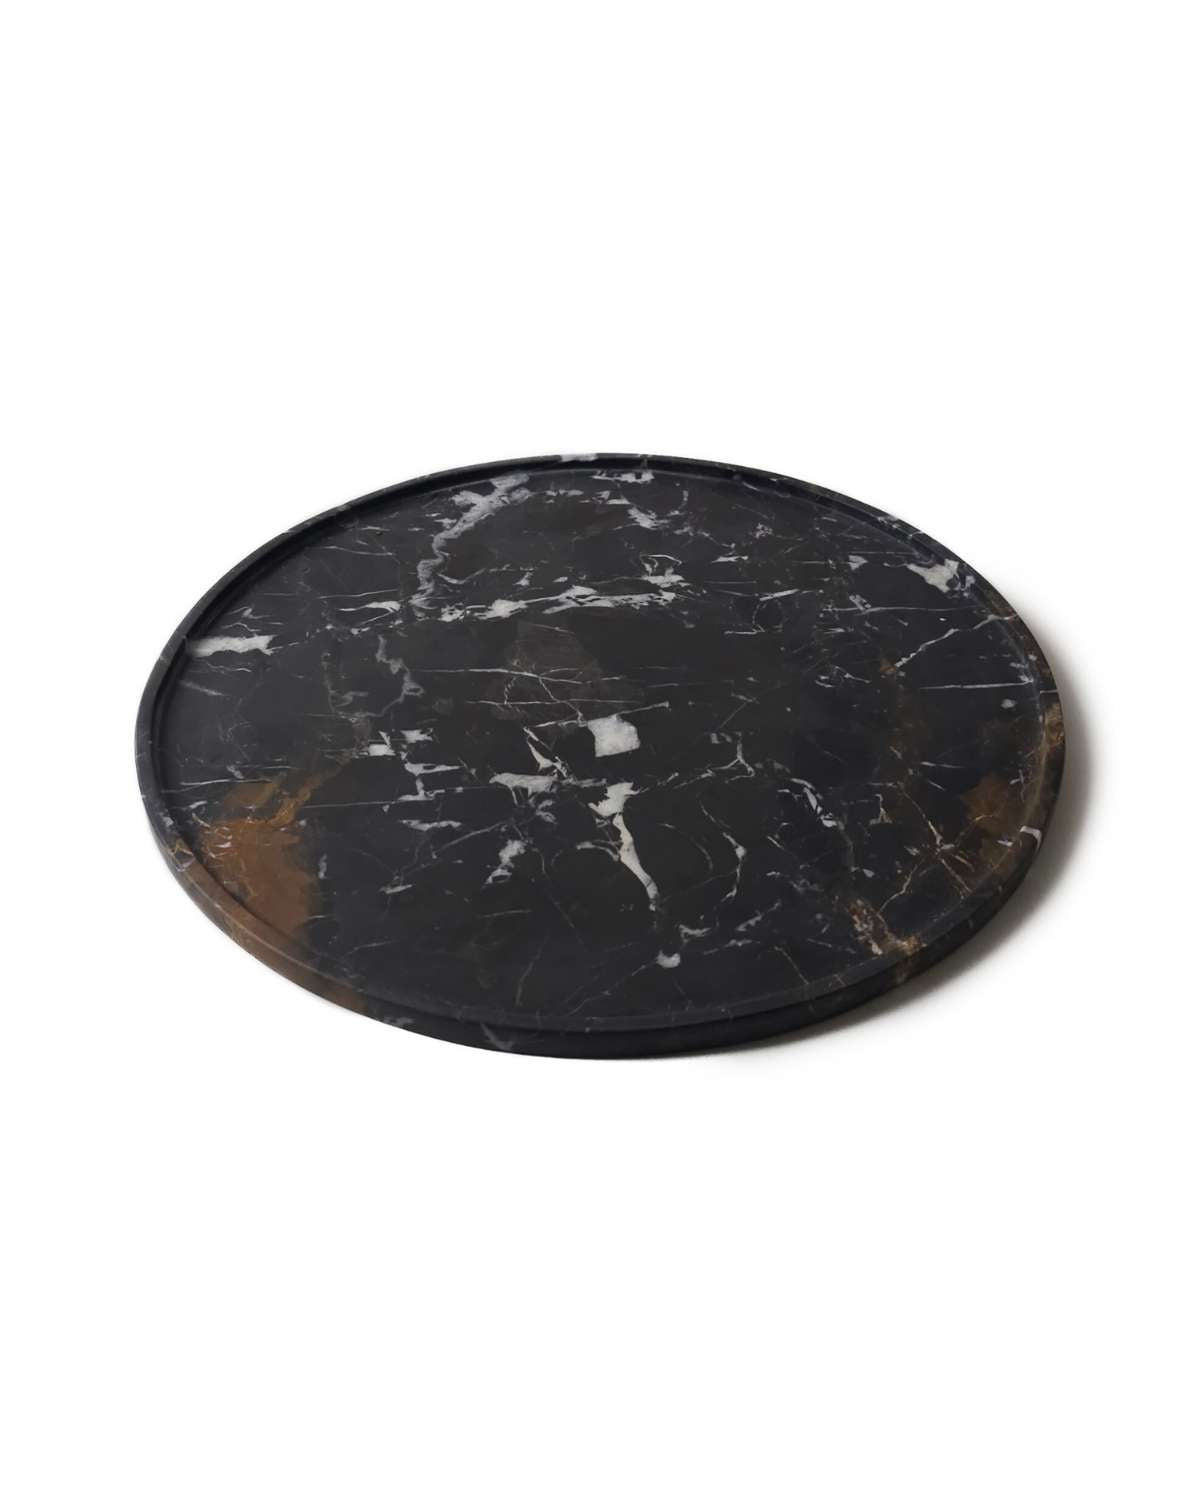 Black Round Marble Tray Decor Accents